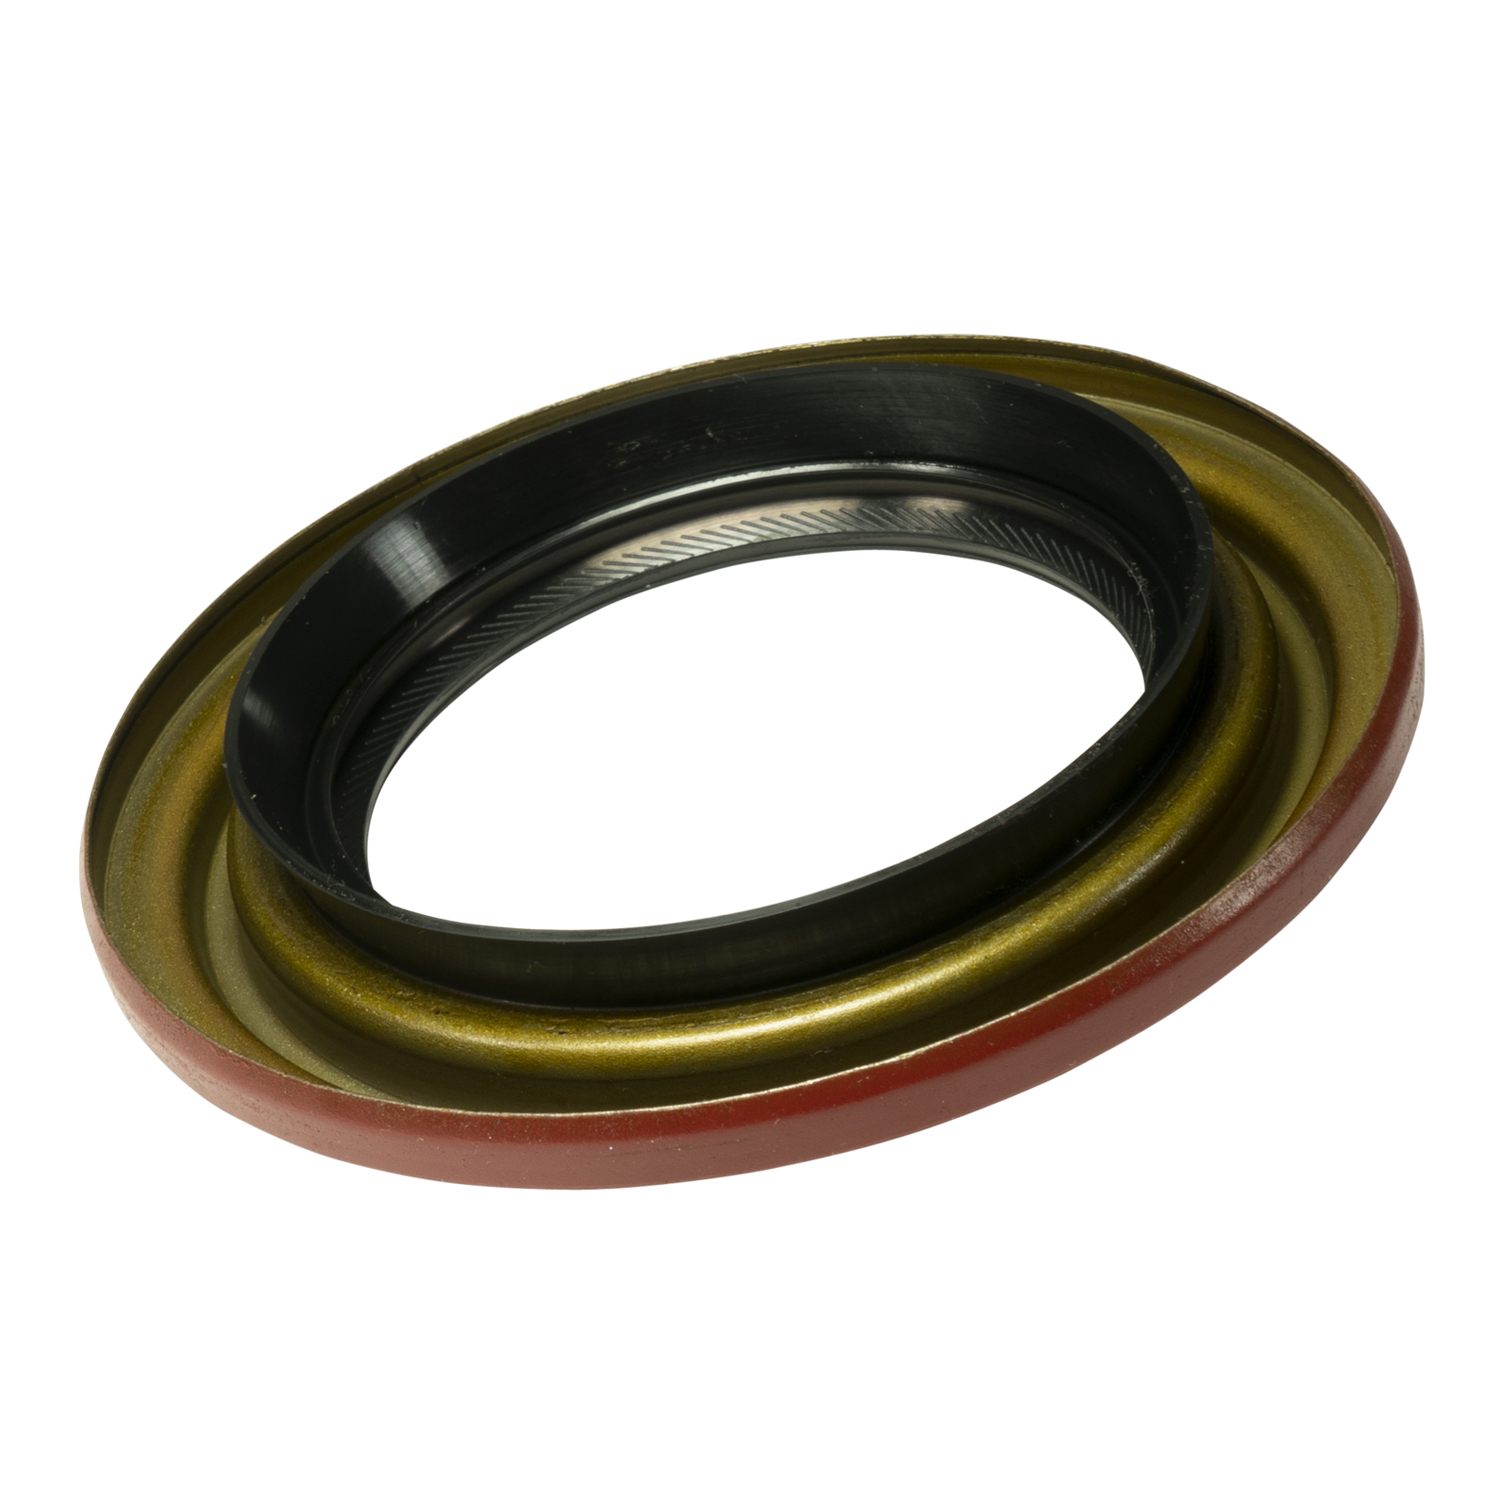 Replacement pinion seal (Non-flanged style) for Dana 80 